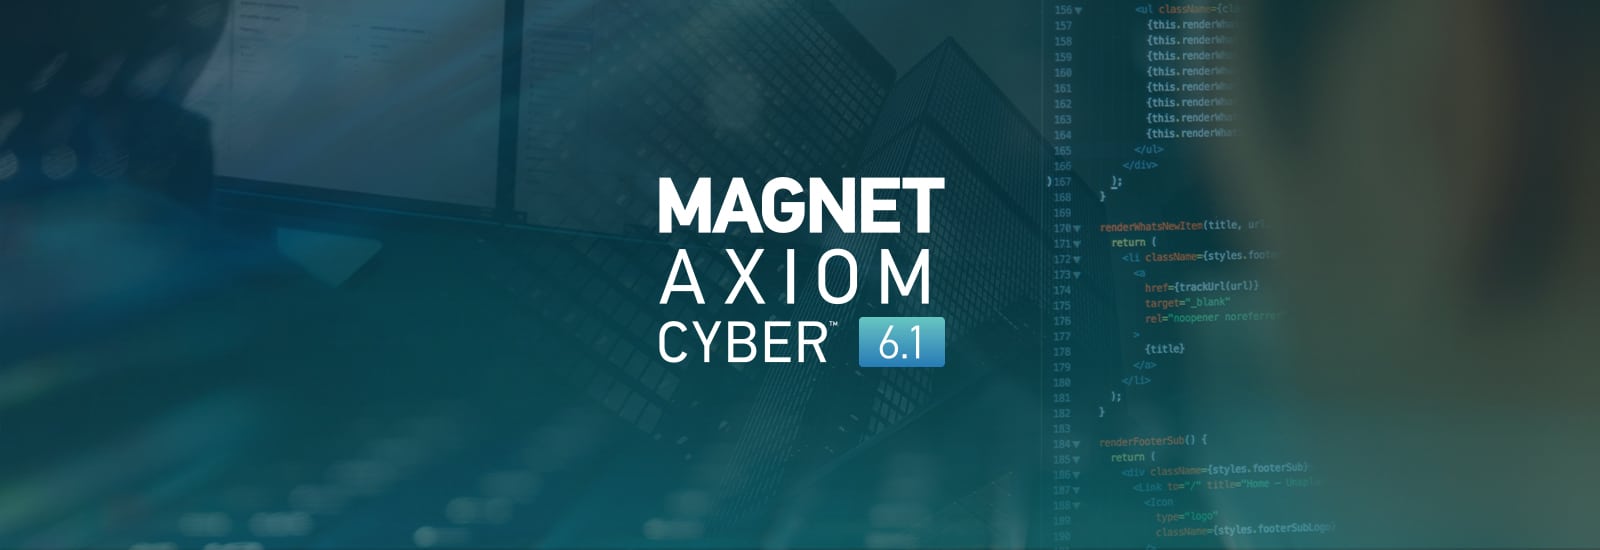 A decorative header for the Magnet AXIOM Cyber 6.1 release